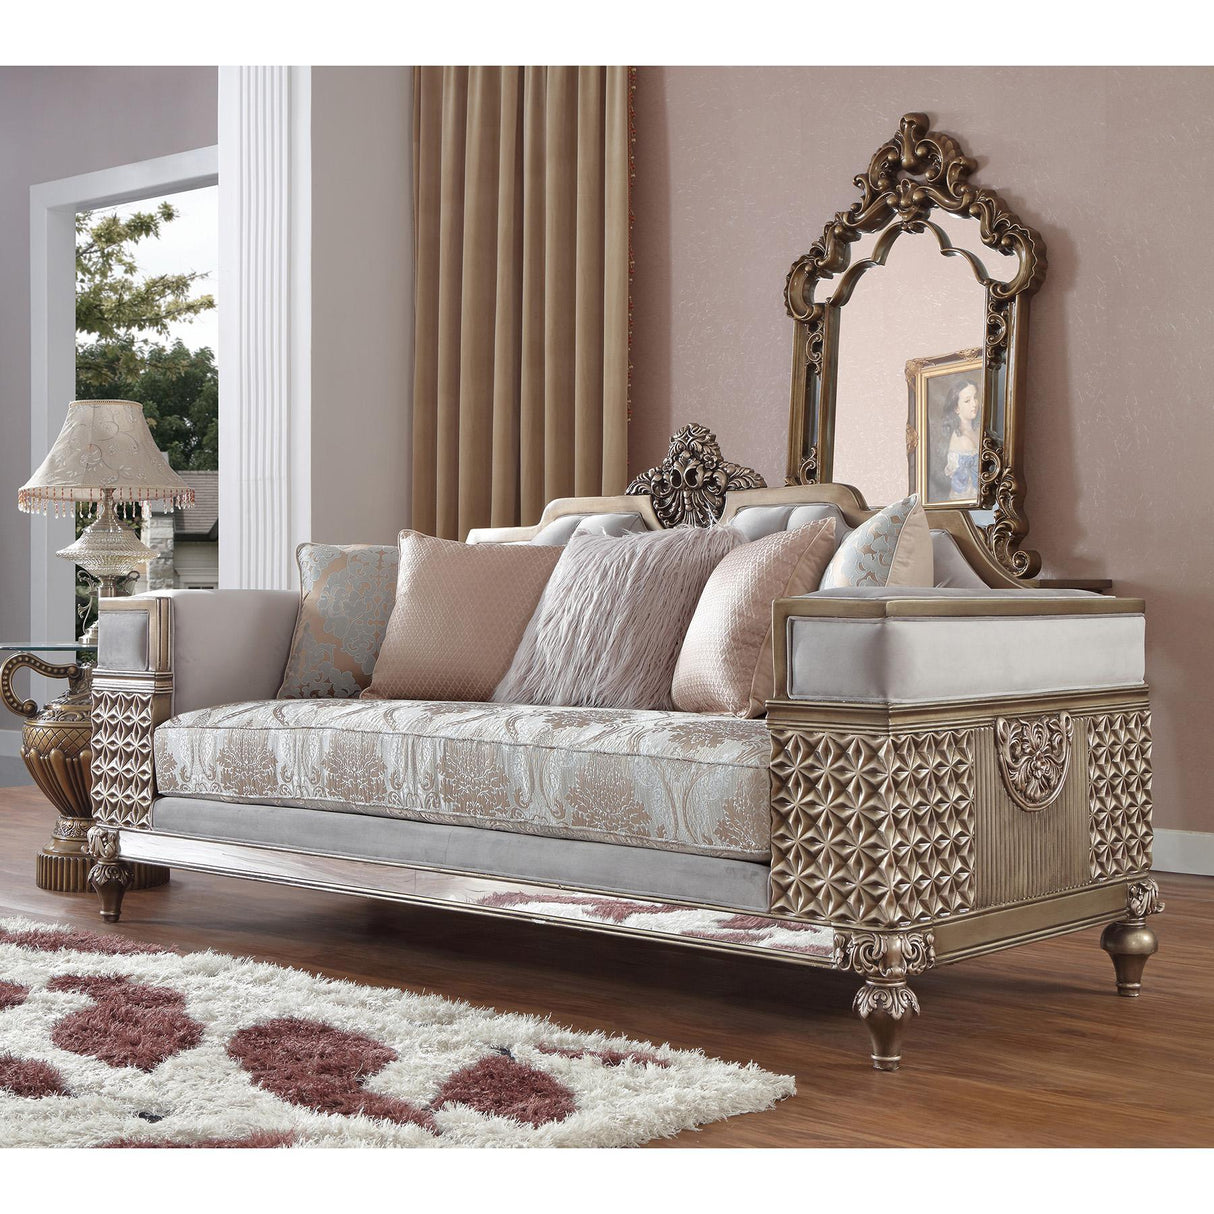 HD-6033 Traditional Sofa and Loveseat in Pearl Fabric & Bronze Finish by Homey Design Homey Design Furniture